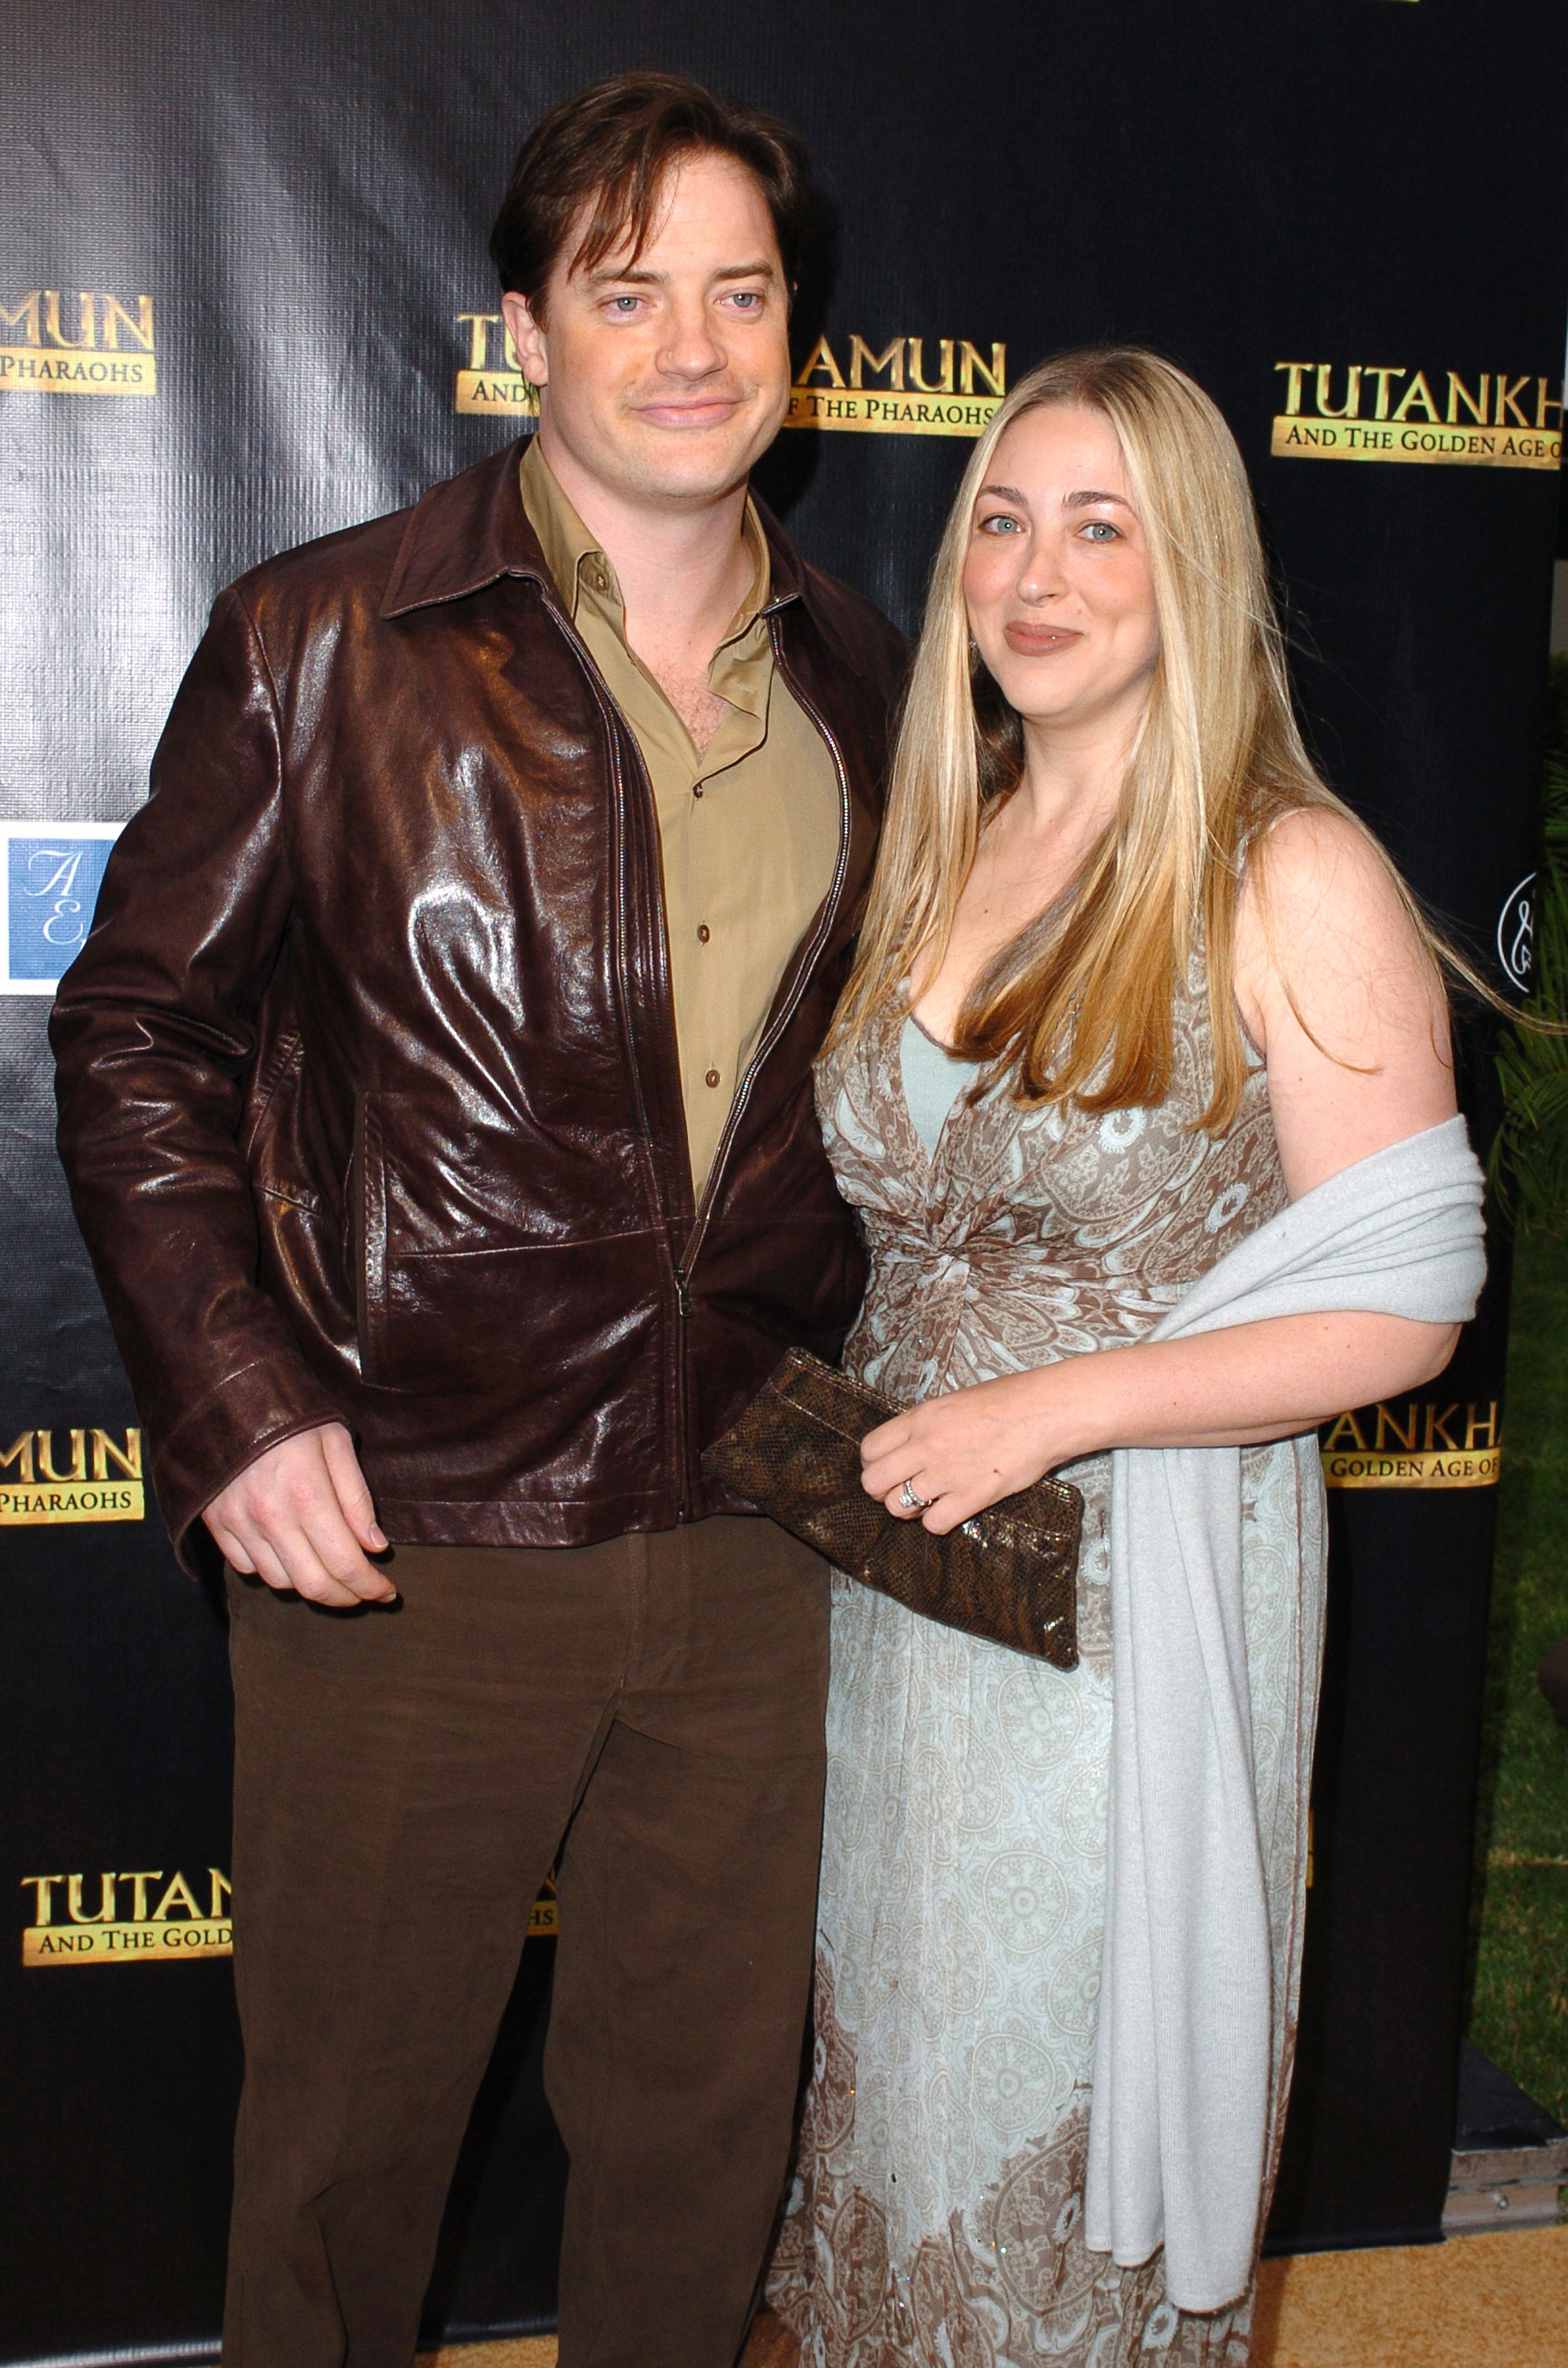 Brendan Fraser and Afton Smith at the opening party for "Tutankhamun and the Golden Age of the Pharaohs" at LACMA in Los Angeles, California, on June 15, 2005. | Source: Getty Images